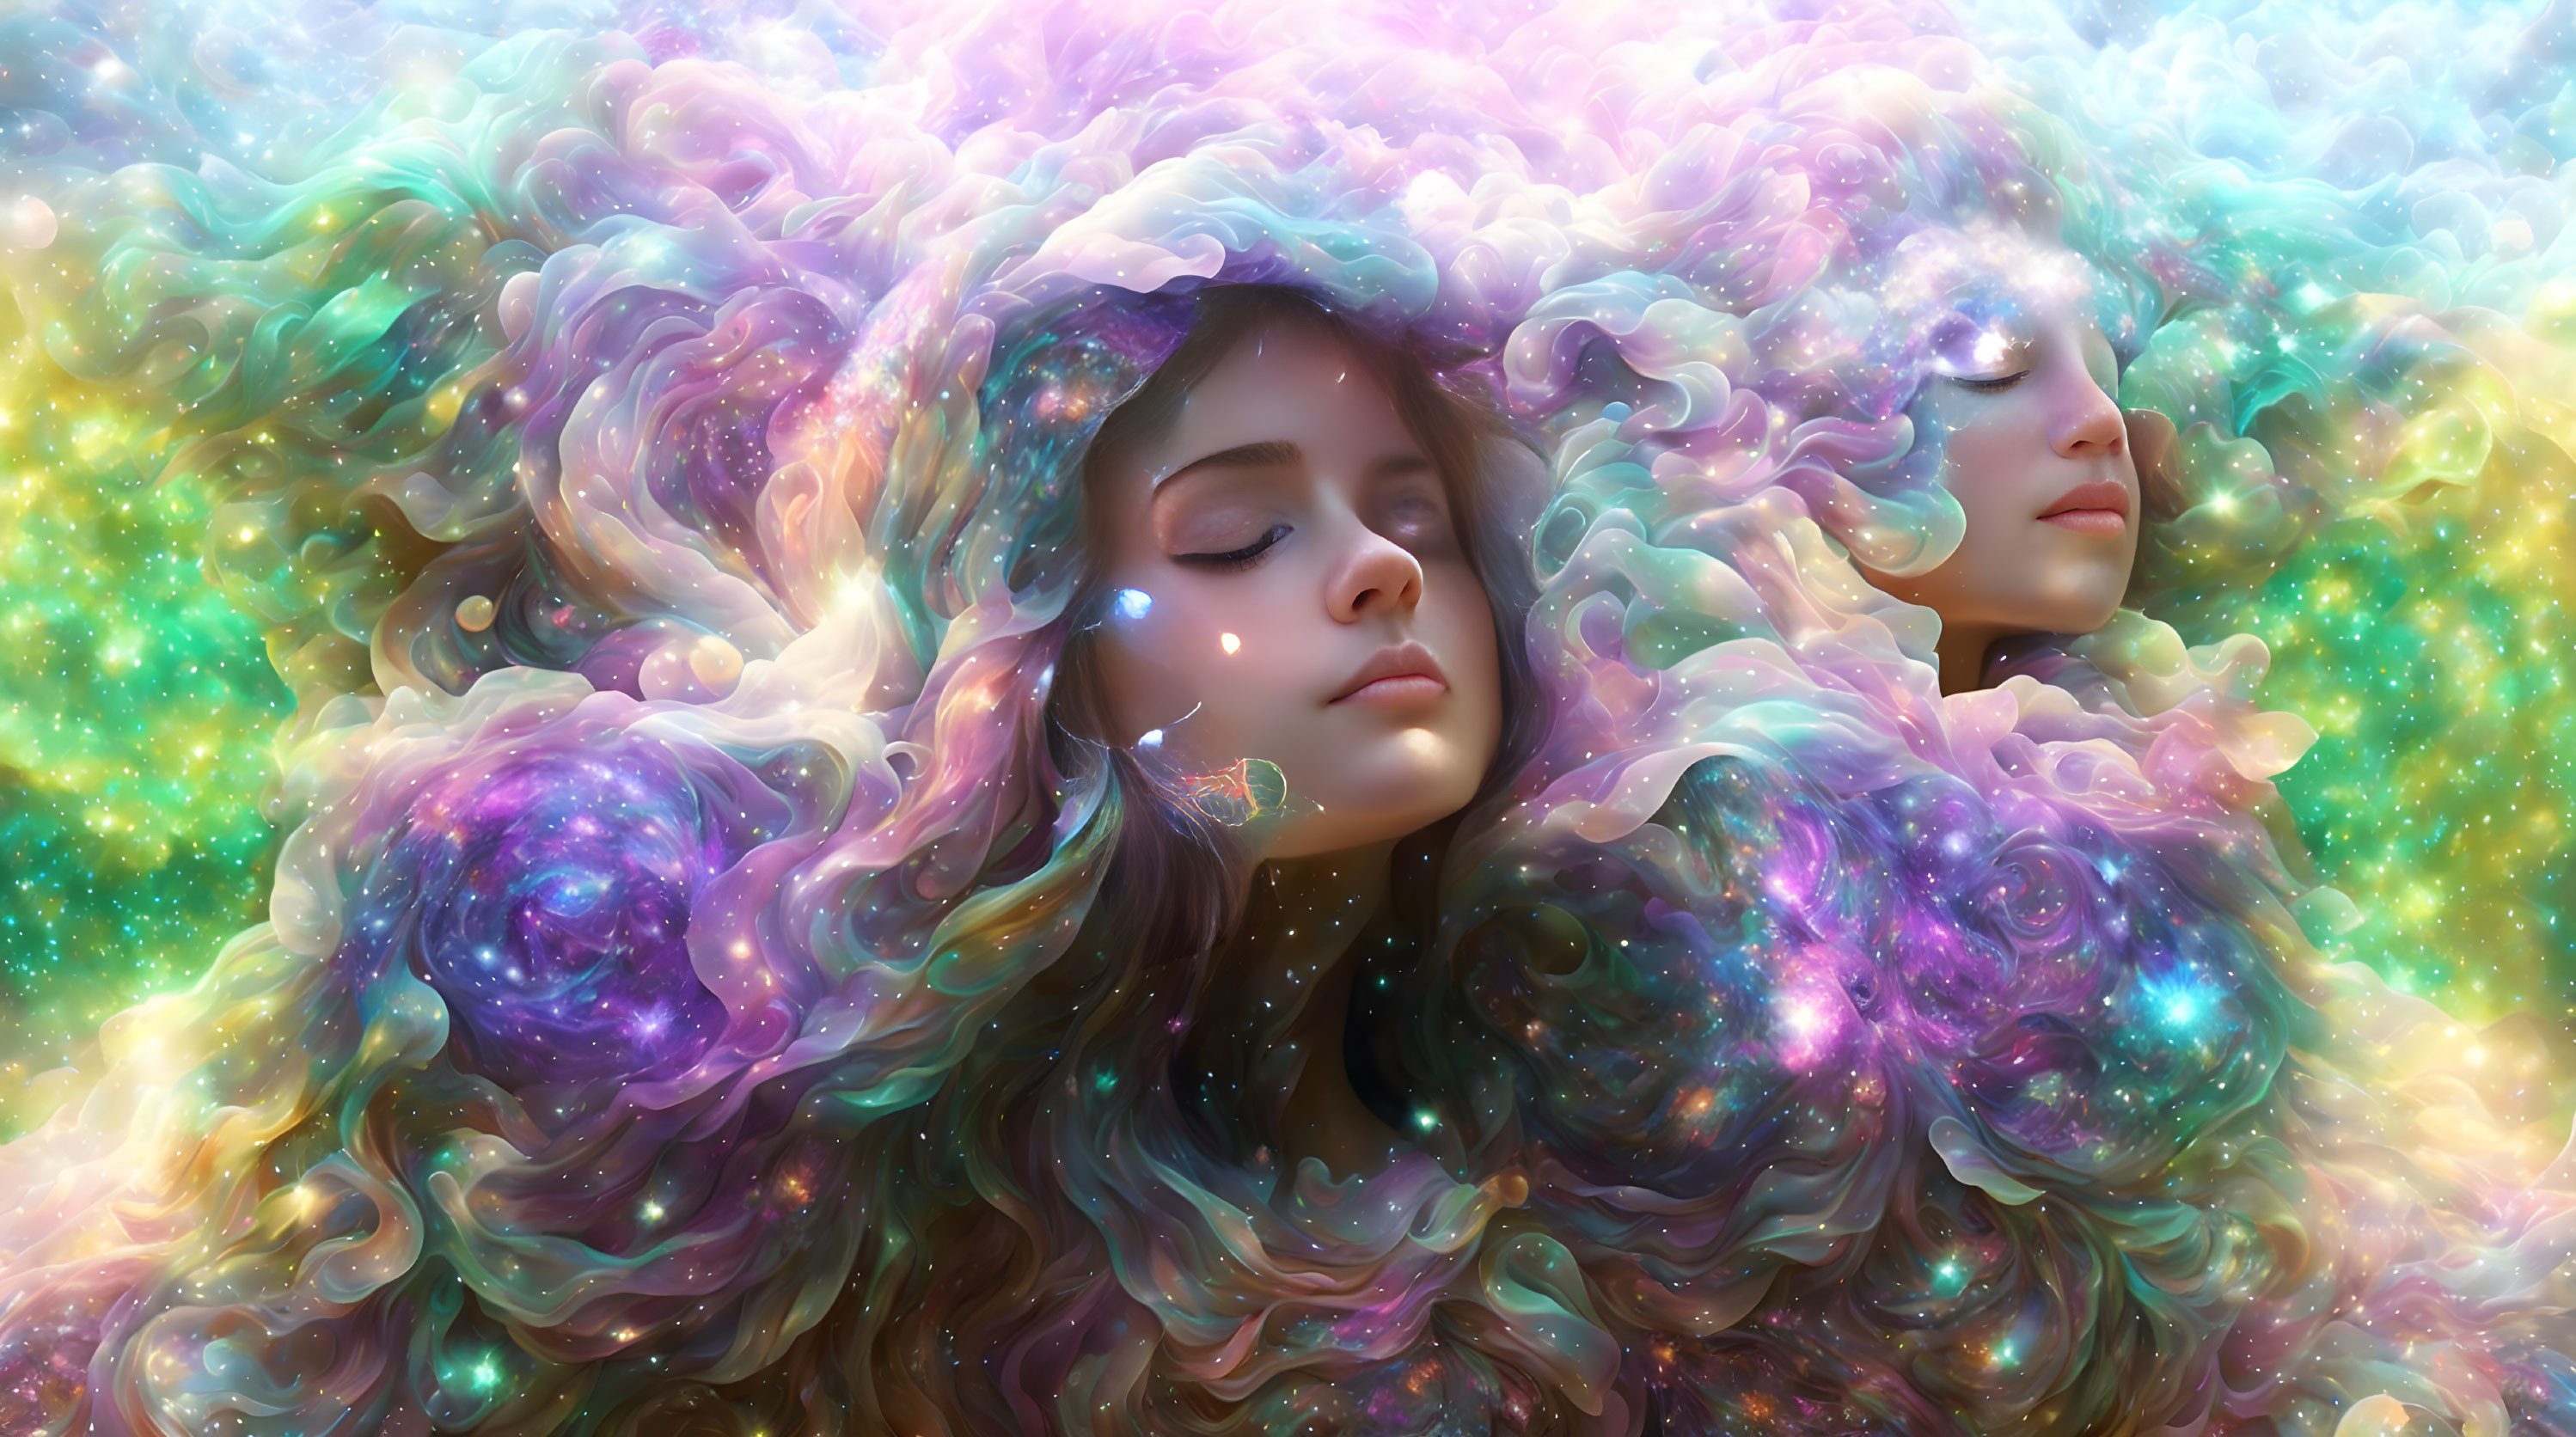 Ethereal figures in serene cosmos-inspired dreamscape